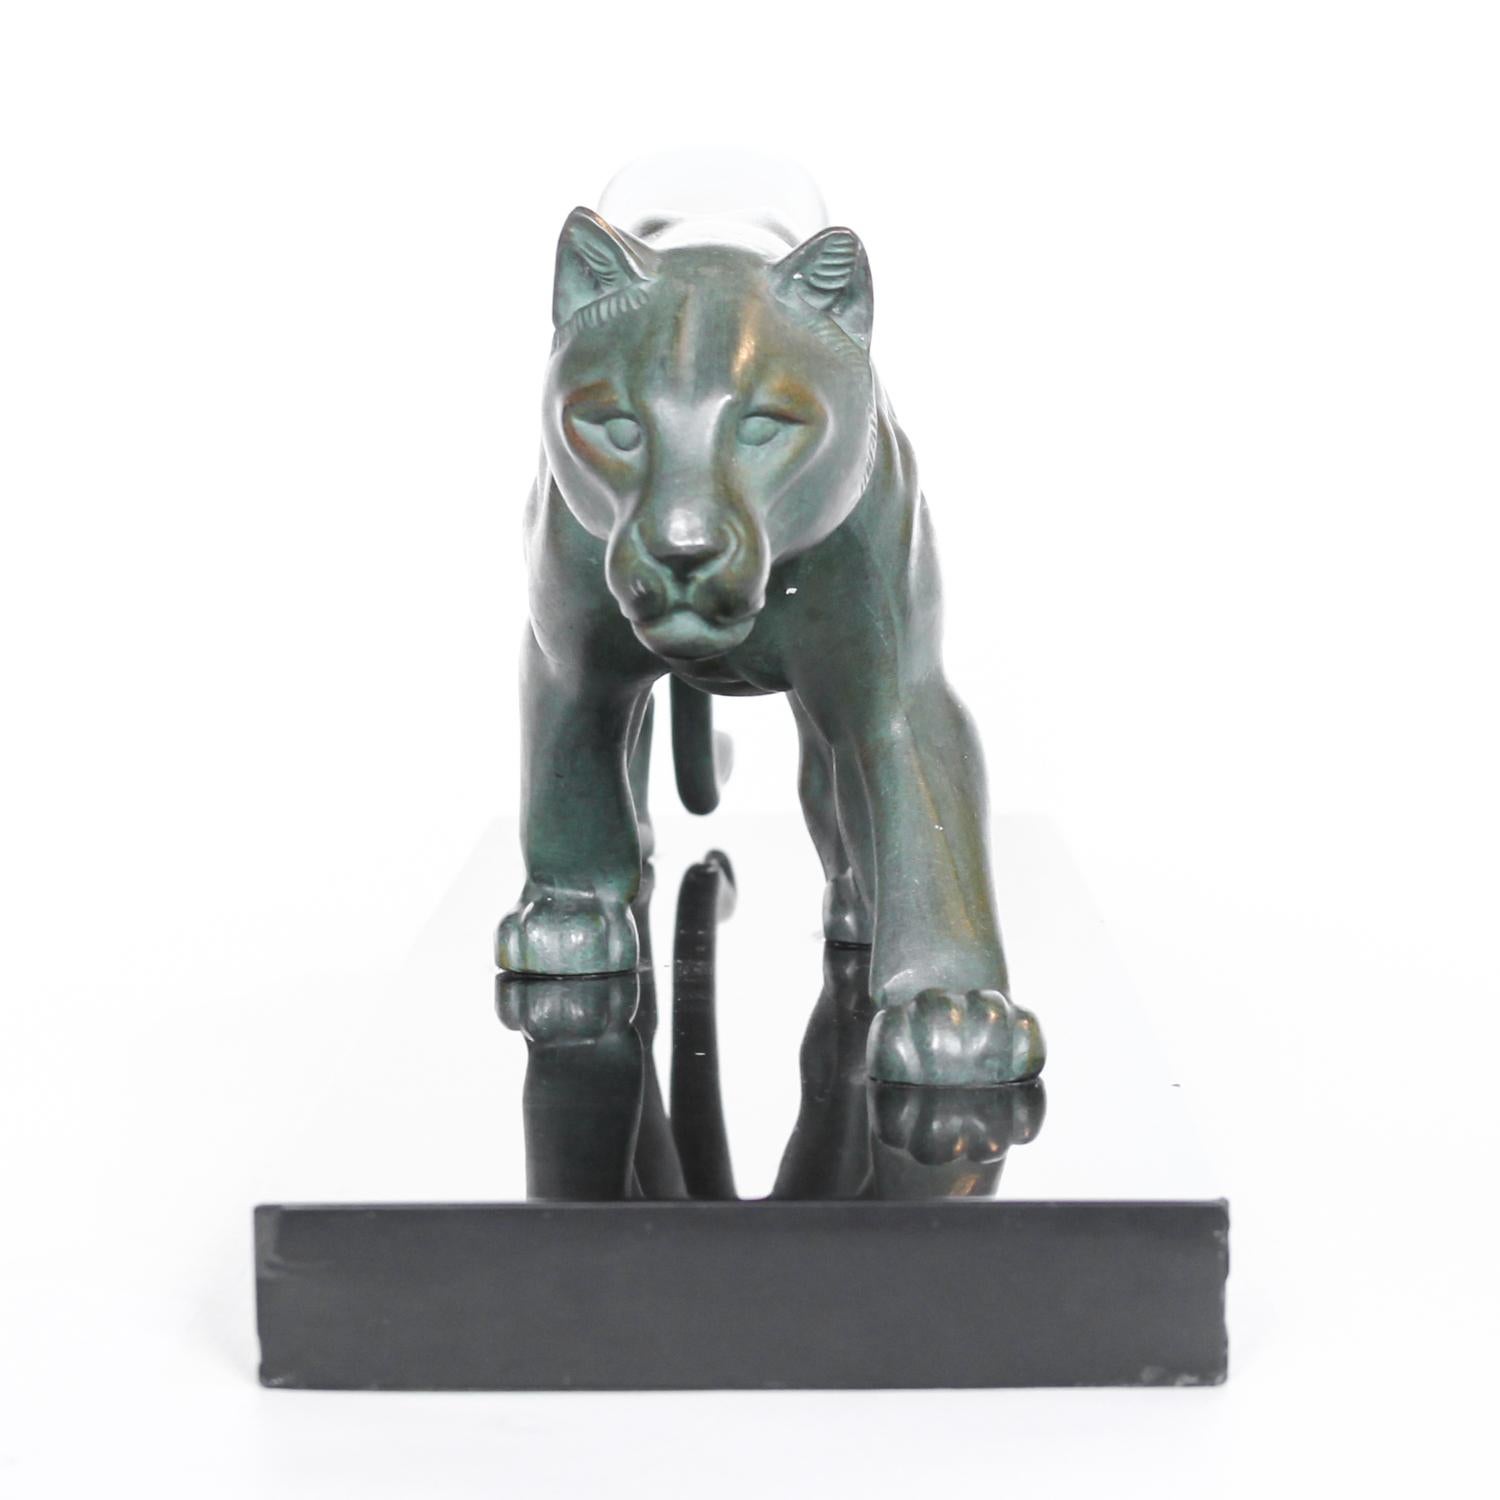 An Art Deco, patinated spelter study of a prowling panther, mounted on a black marble base. Signed 'M. Leduc' to hind leg. Minor chips to base.



